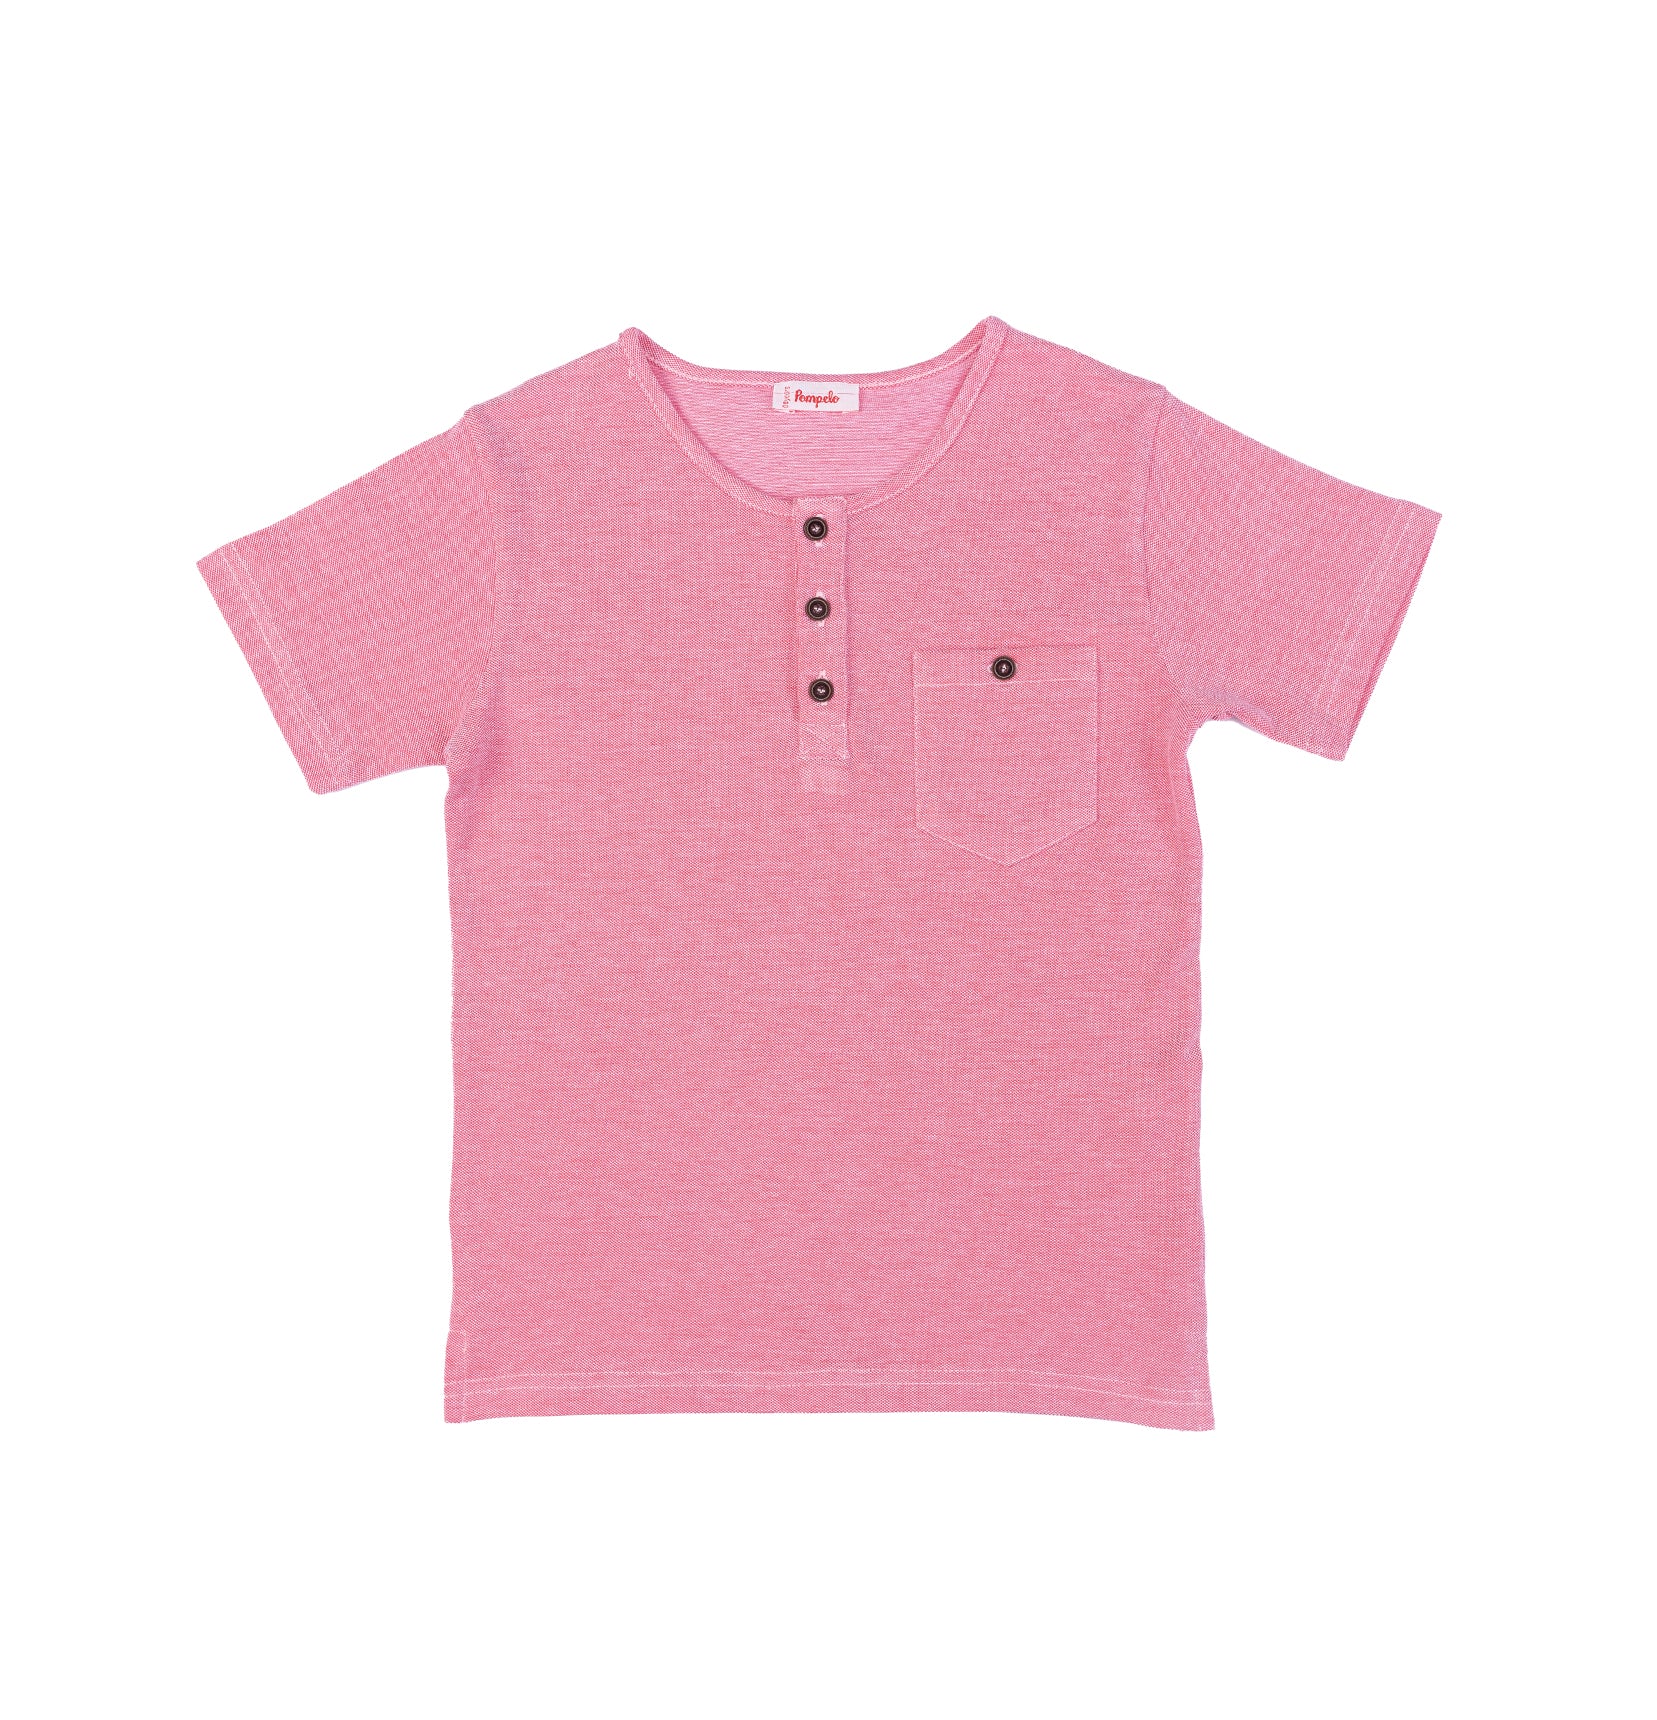 Cool half sleeve cotton t-shirt for boys by Pompelo